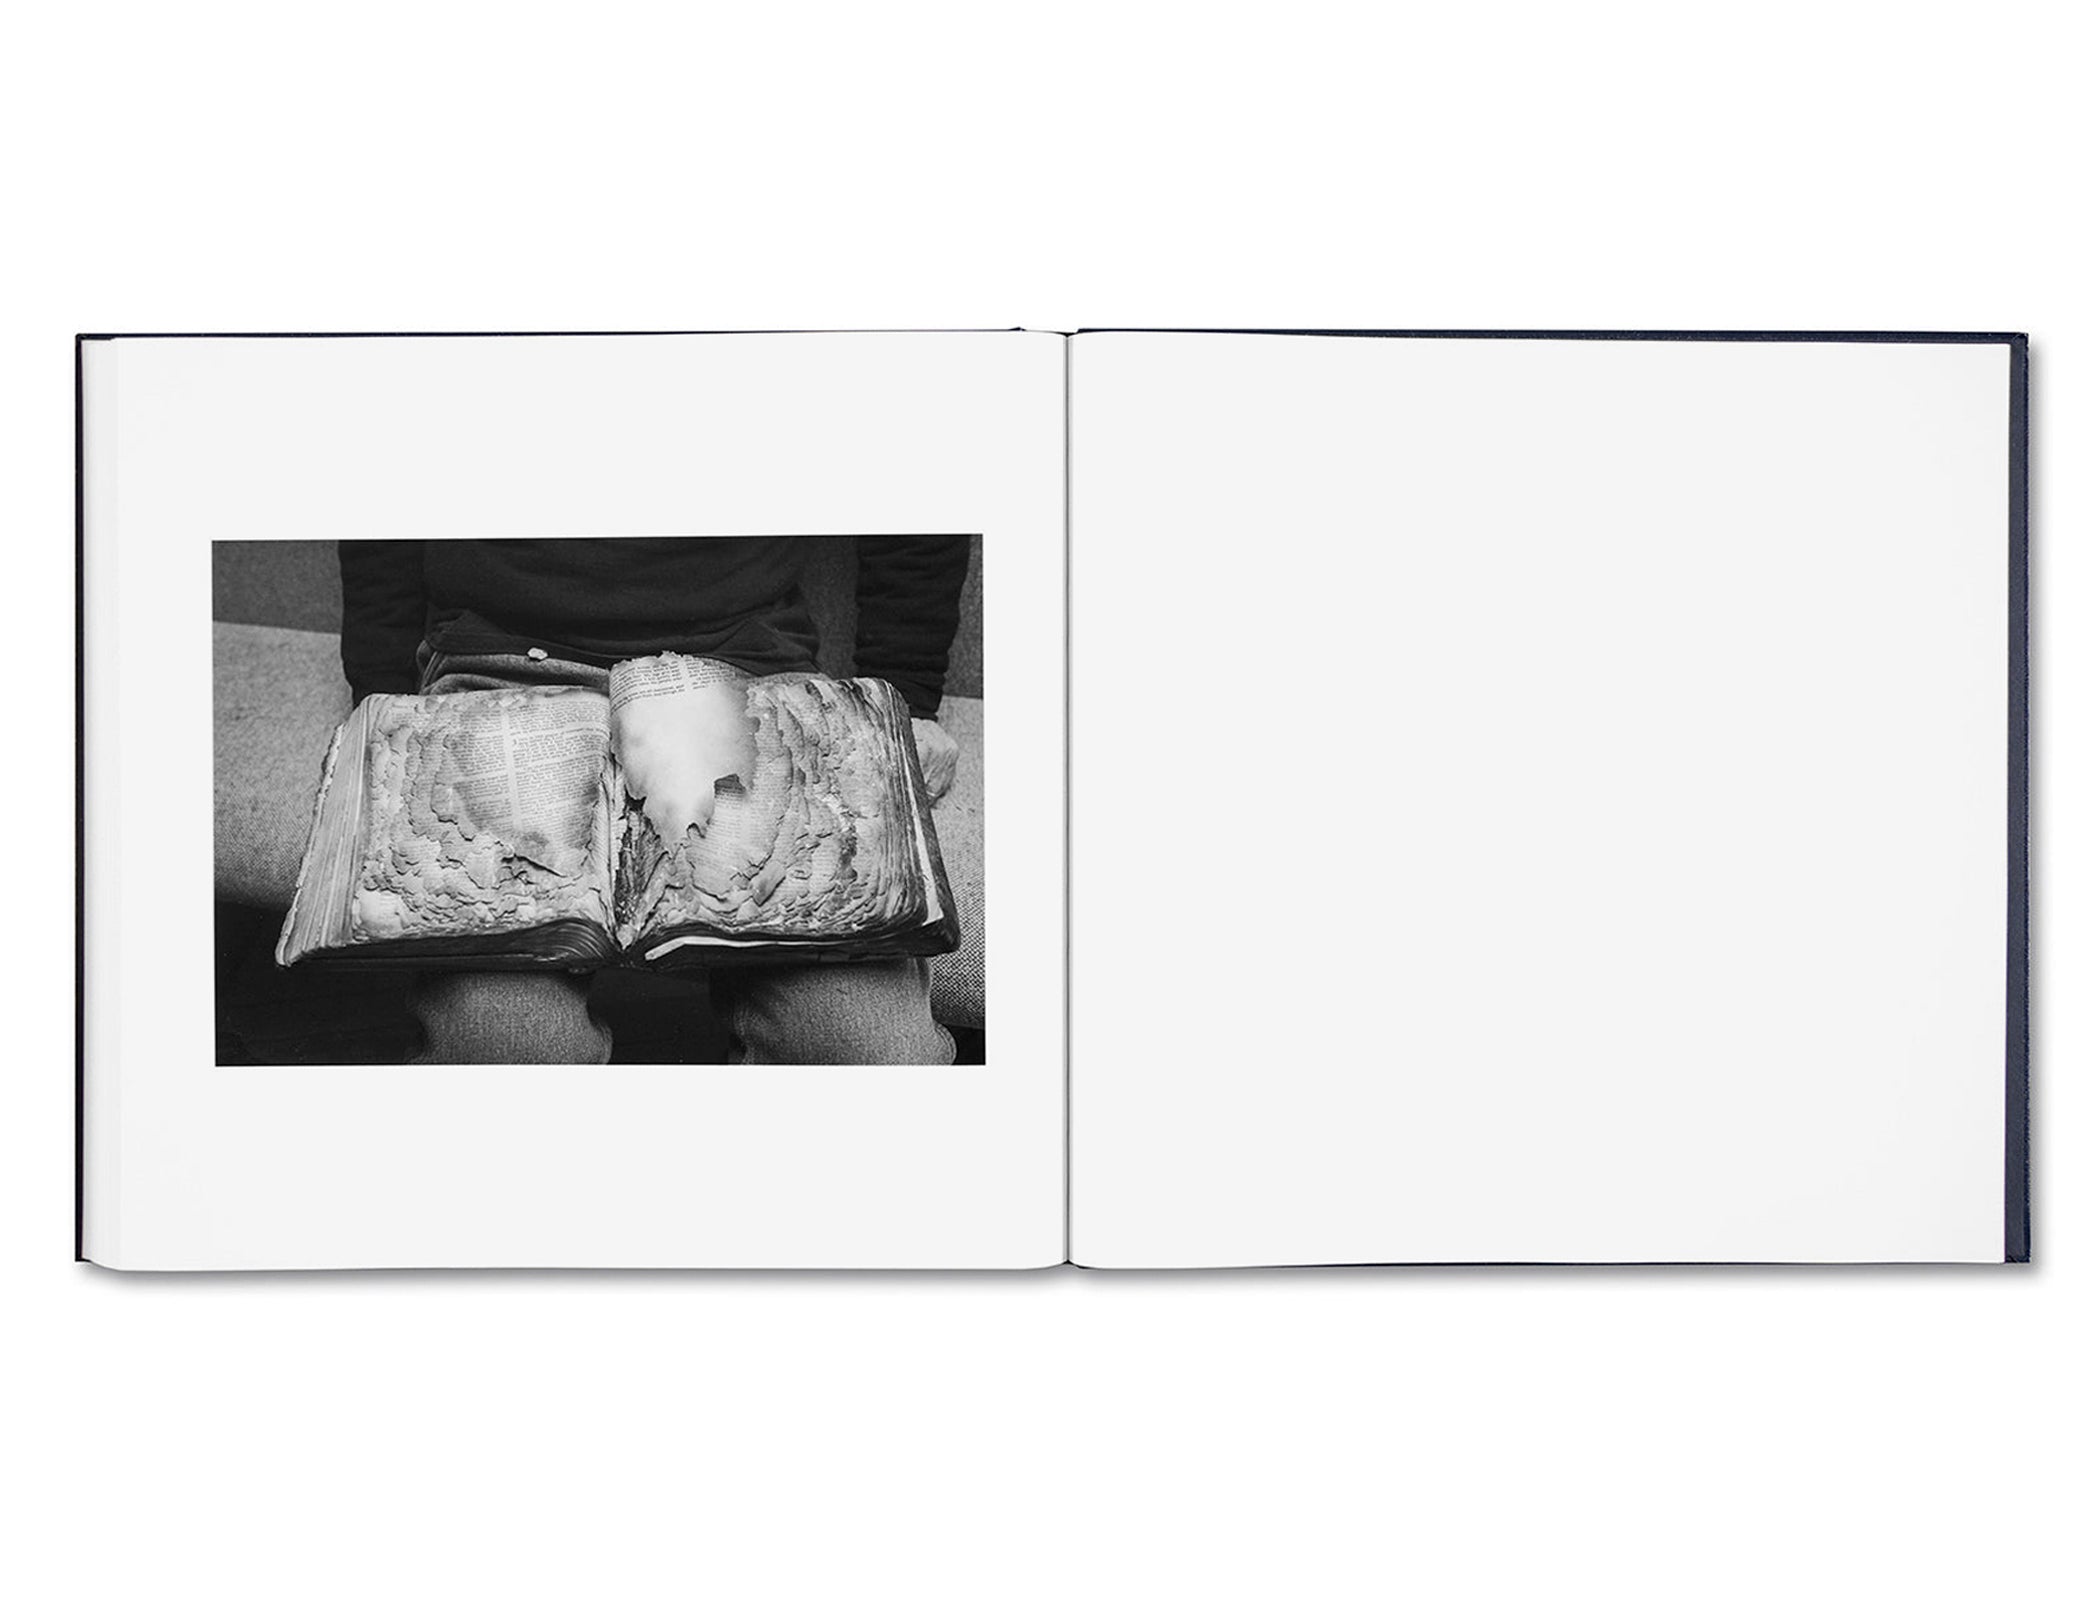 SOME SAY ICE by Alessandra Sanguinetti [SIGNED SLIP]